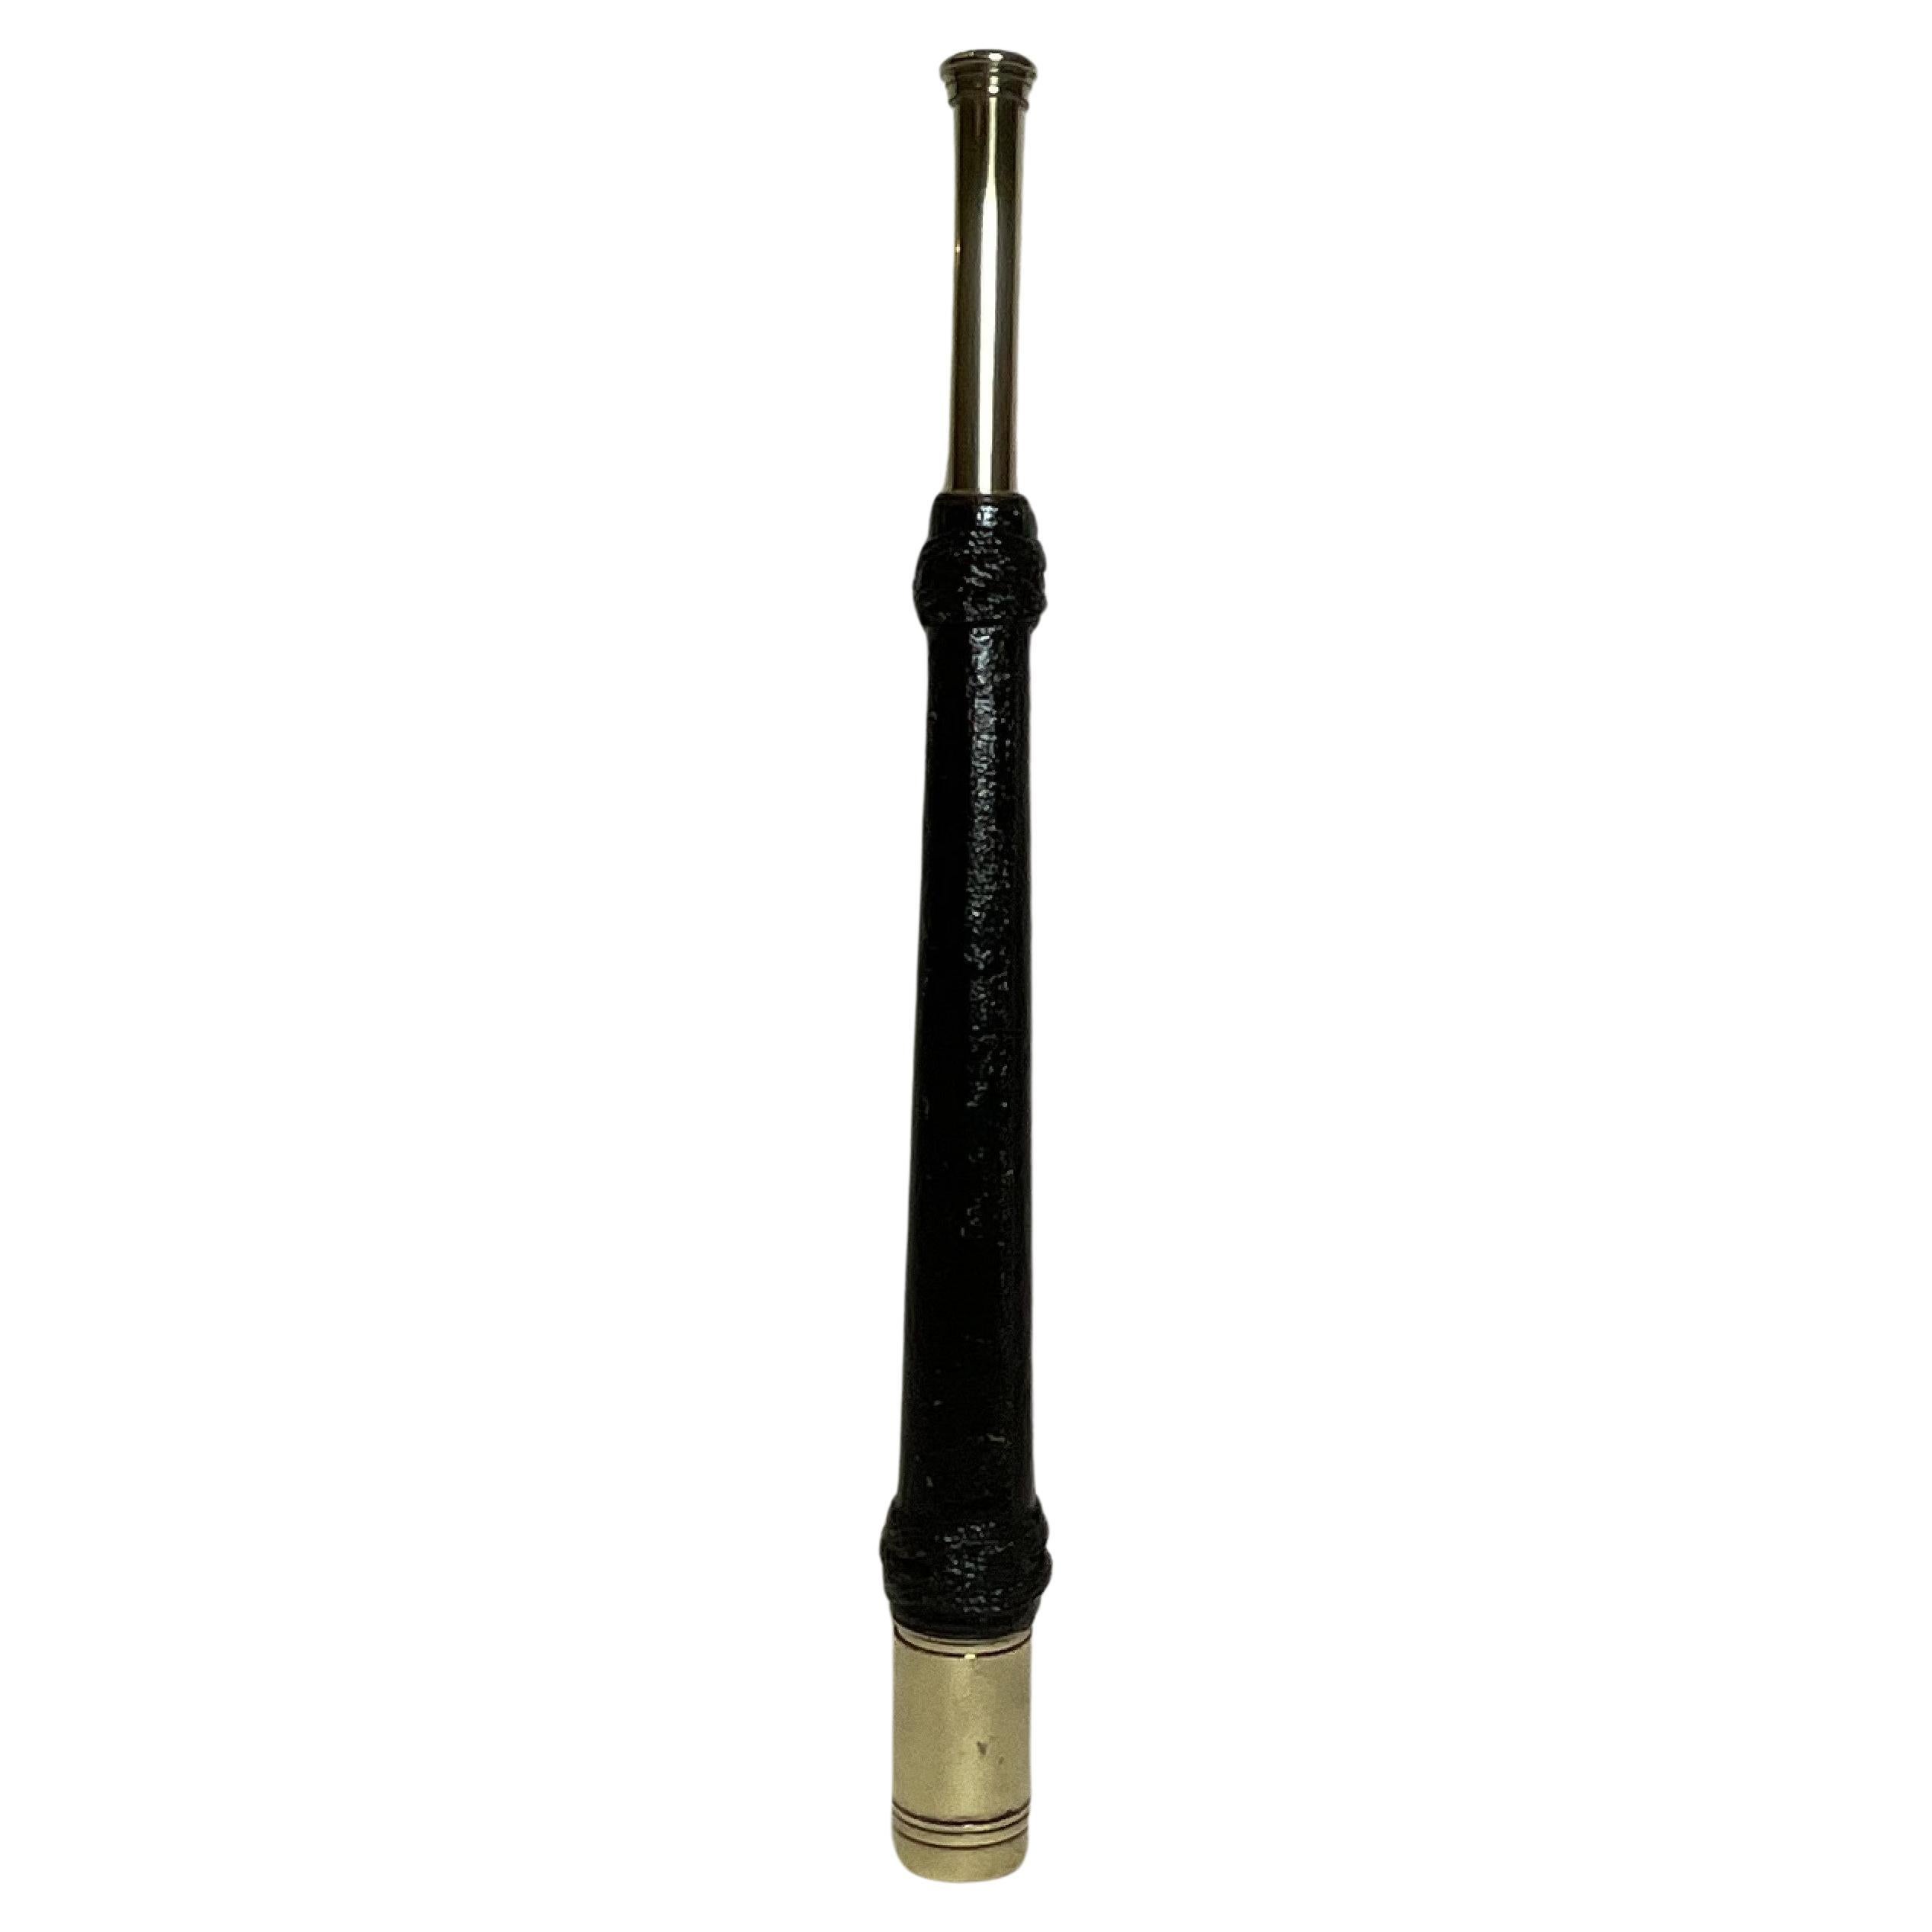 Ships Spyglass Telescope with Rope Cover For Sale